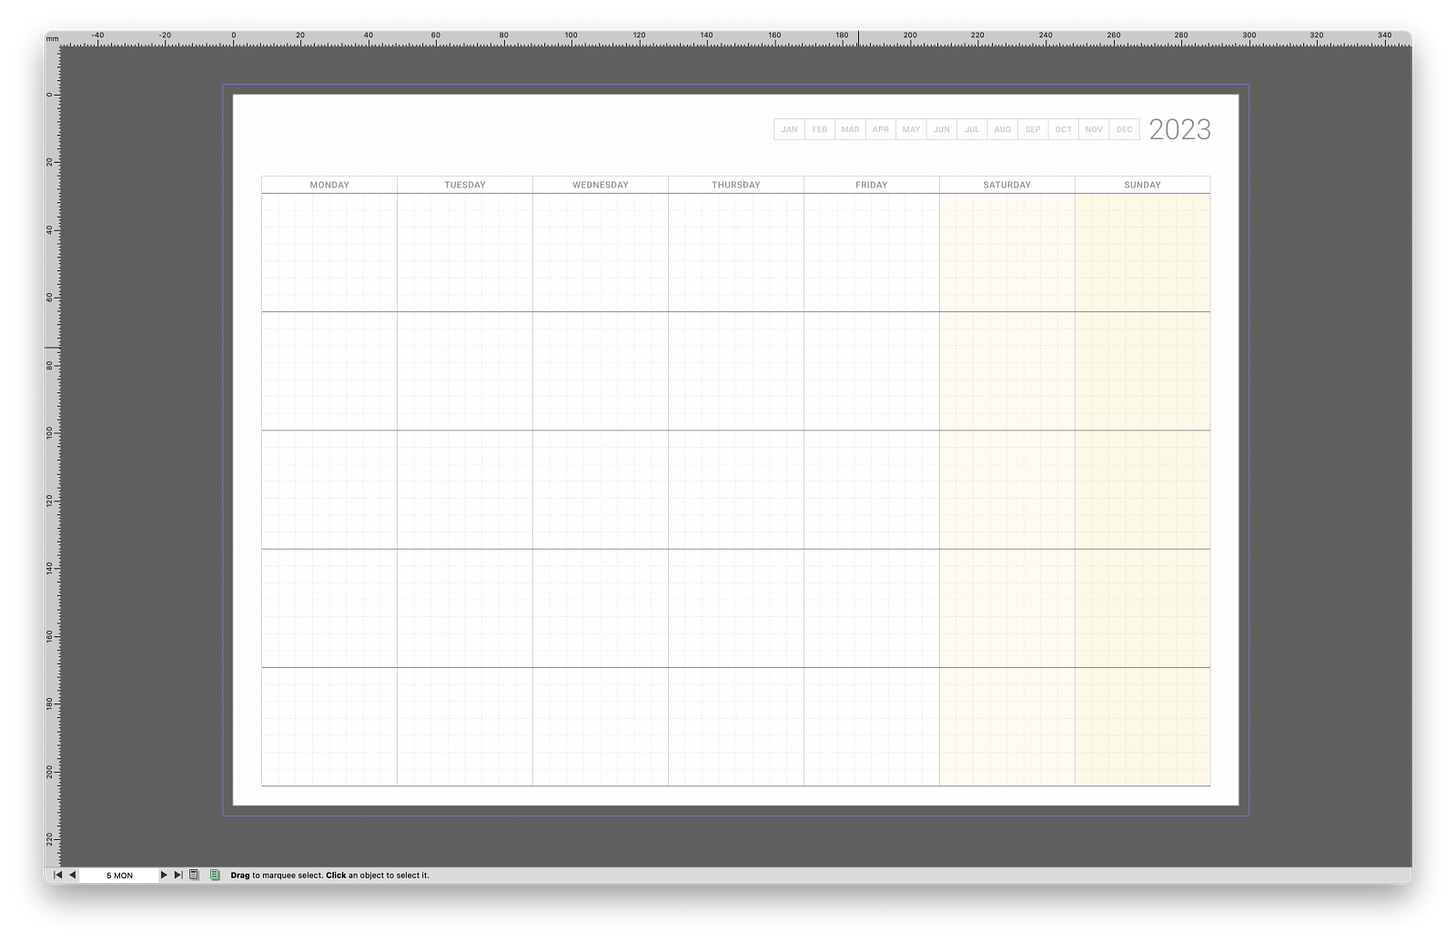 A white calendar page on a dark grey background. 7 x 5 rectangles, with dotted 8 x 7 square grid within each. 2023 in largish type on the top right, and 12 rectangles extending half way along the top to the left of the 2023 date, with JAN, FEB, MAR, etc. written inside.